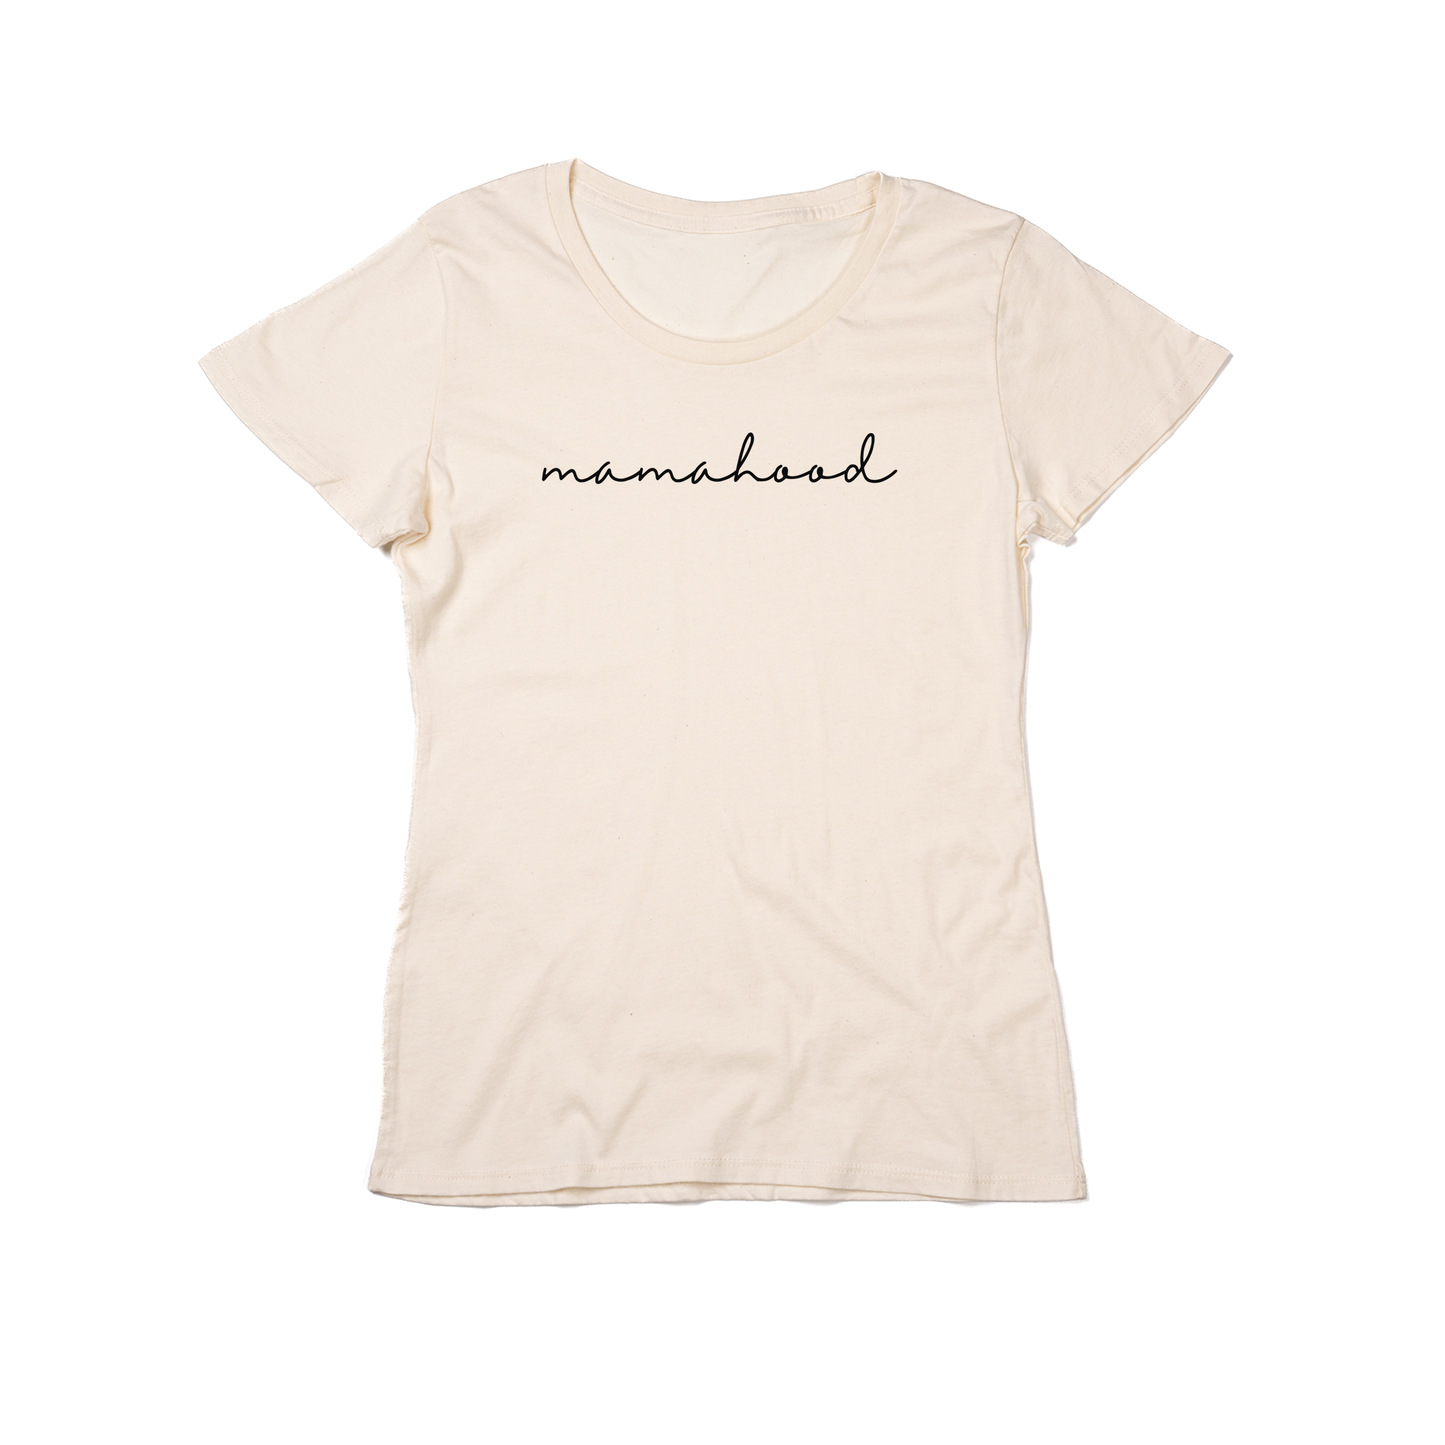 Mamahood (Cursive, Across Front) - Women's Fitted Tee (Natural)